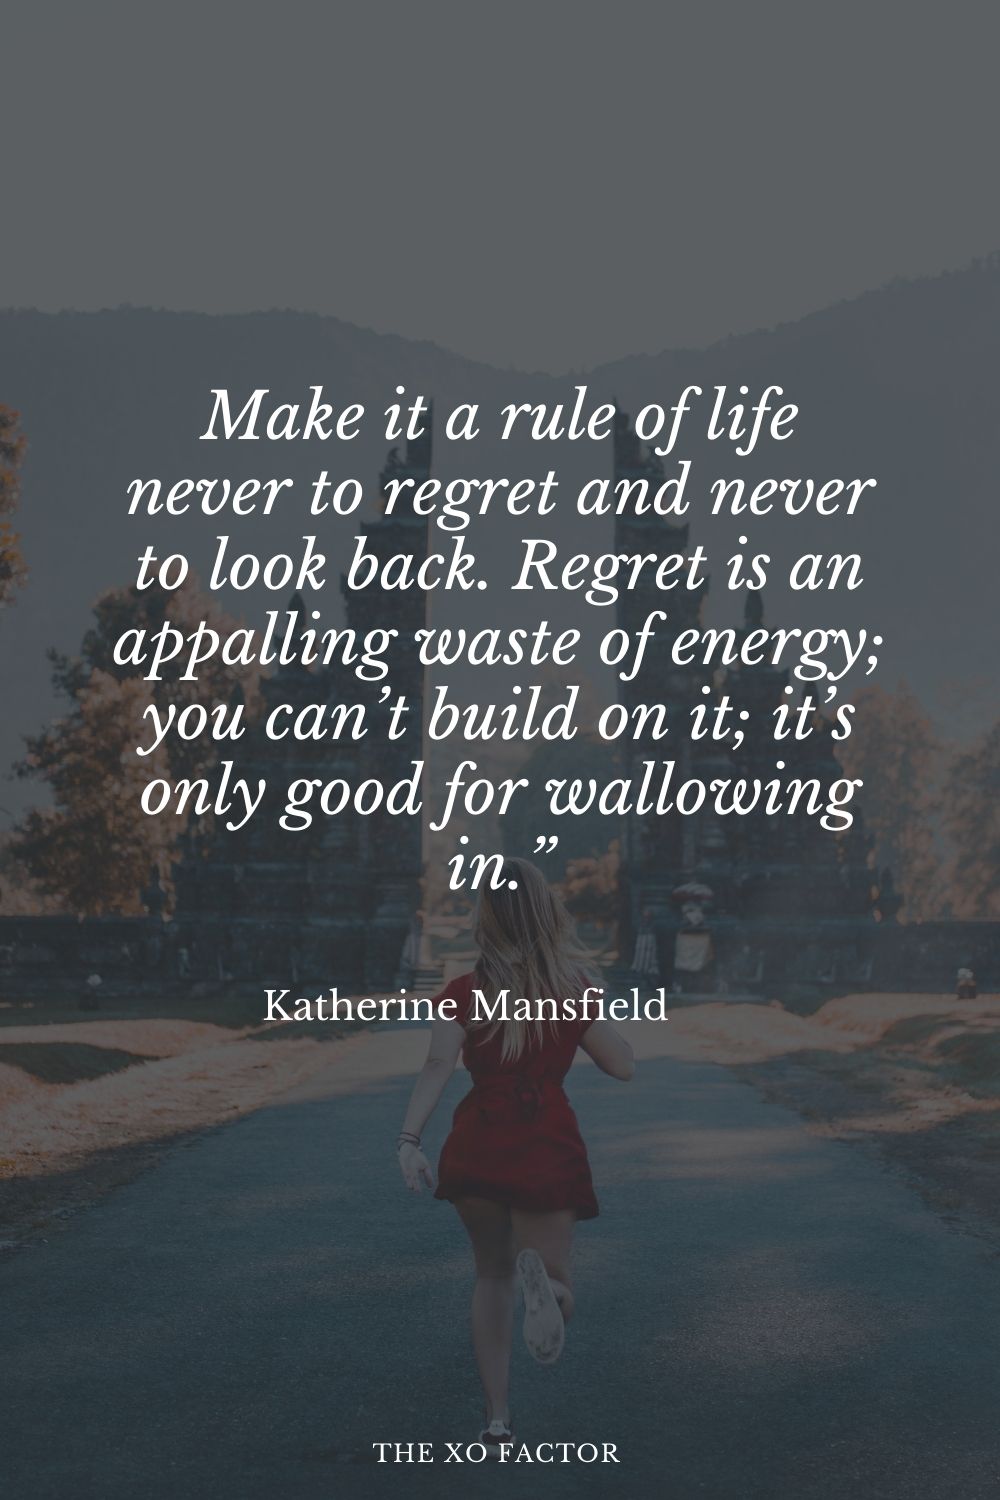 Make it a rule of life never to regret and never to look back. Regret is an appalling waste of energy; you can’t build on it; it’s only good for wallowing in.” Katherine Mansfield